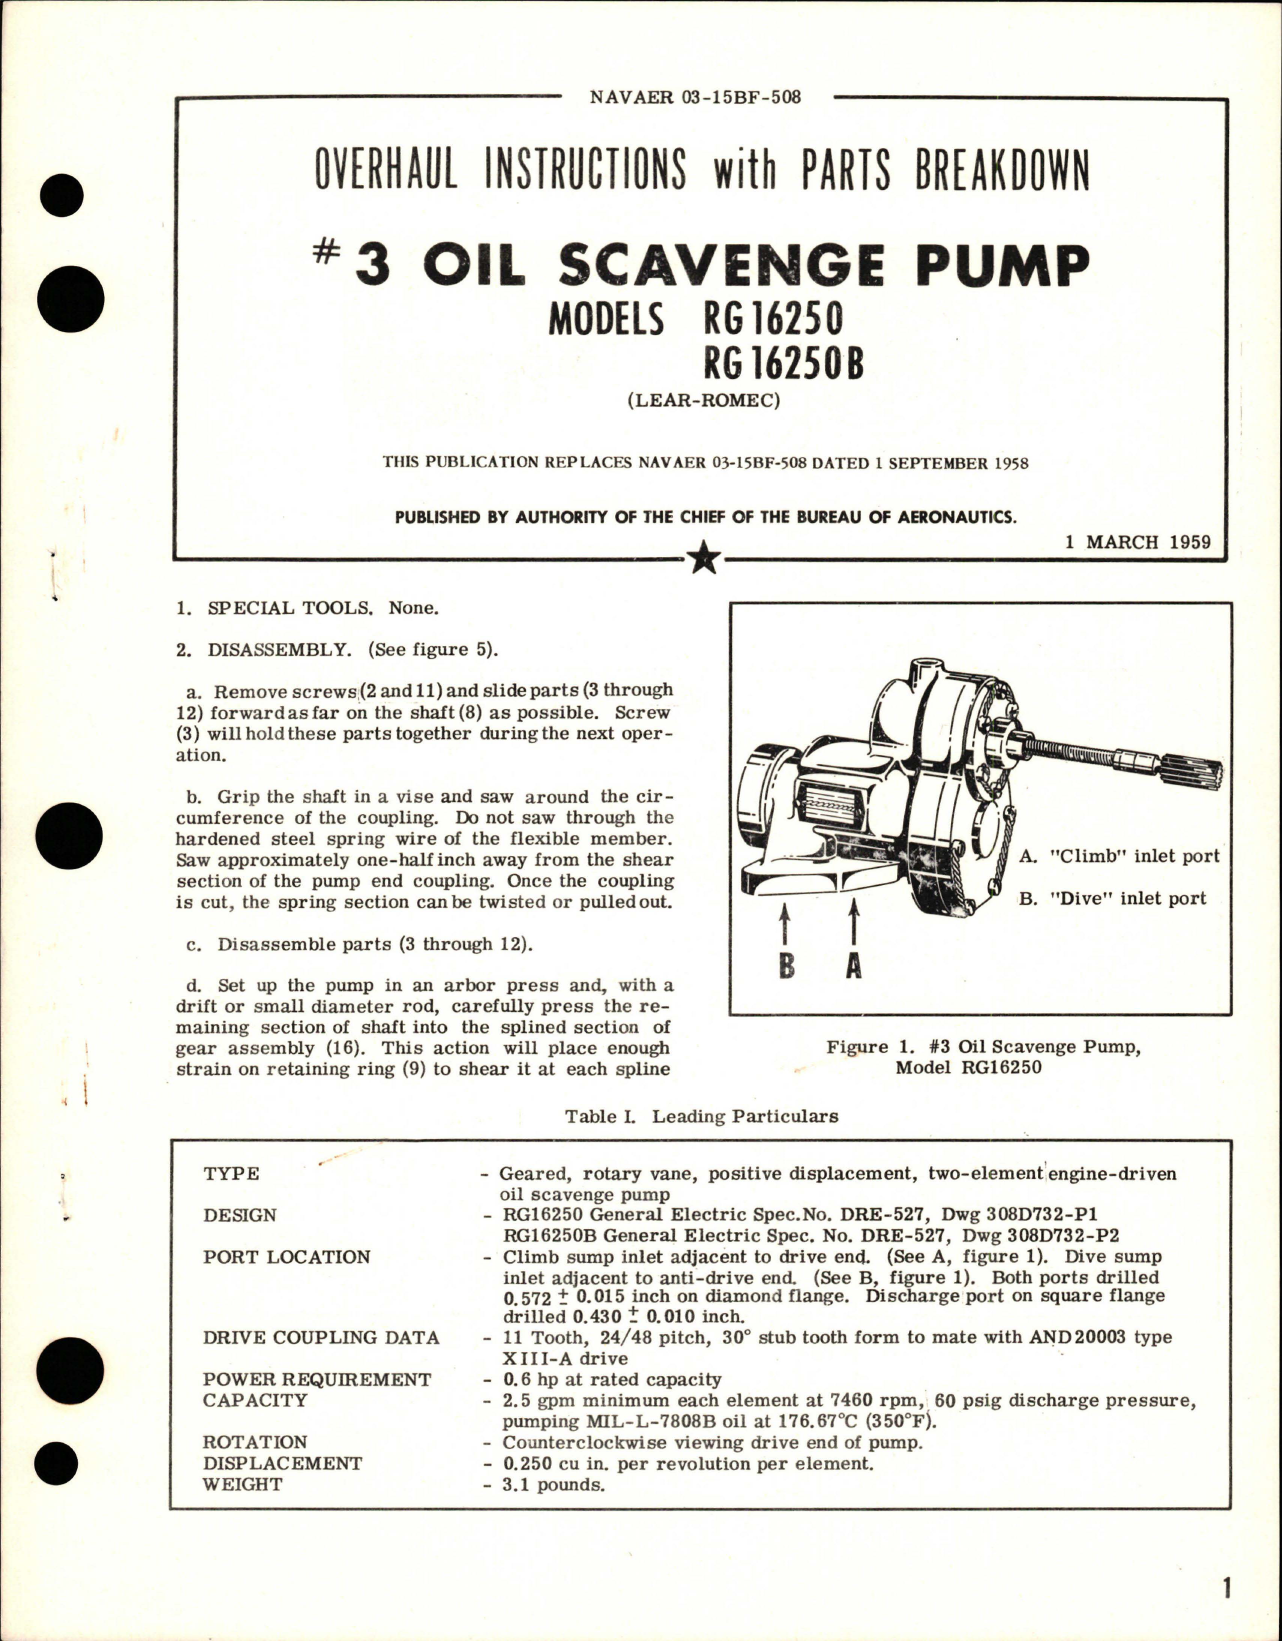 Sample page 1 from AirCorps Library document: Overhaul Instructions with Parts Breakdown for Oil Scavenge Pump - No. 3 - Models RD16250 and RG16250B